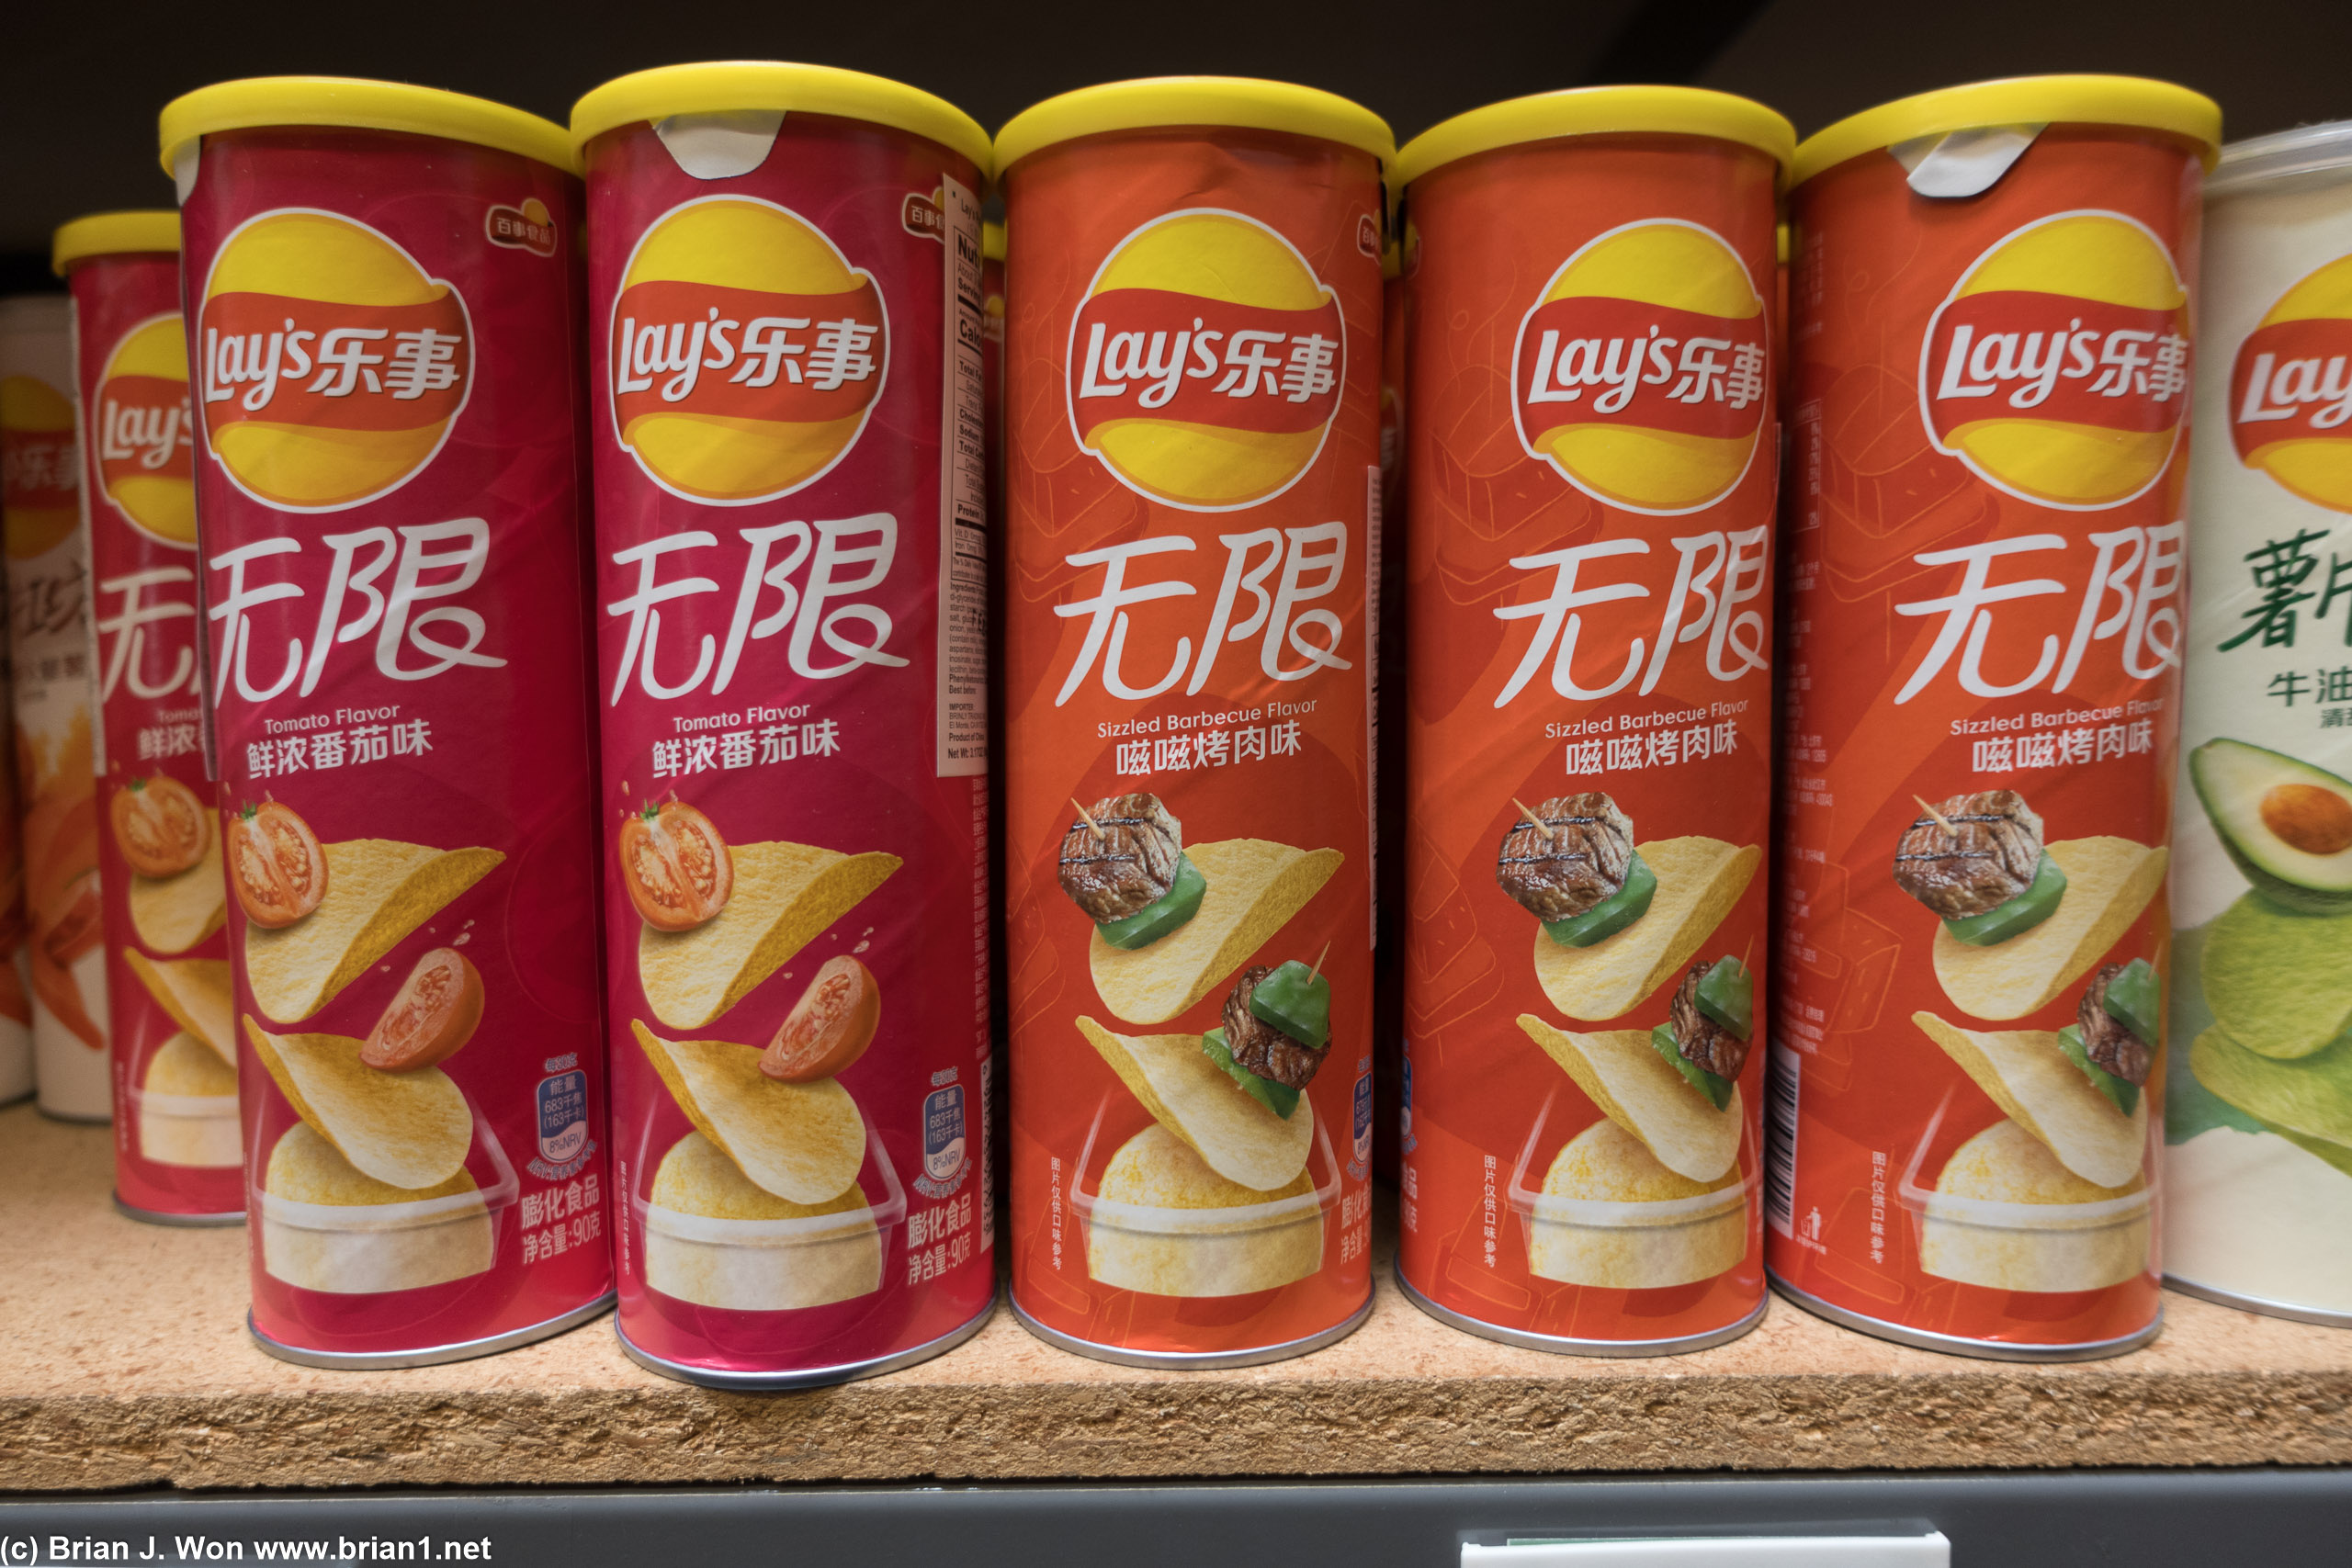 Extensive selection of Lay's potato chips.